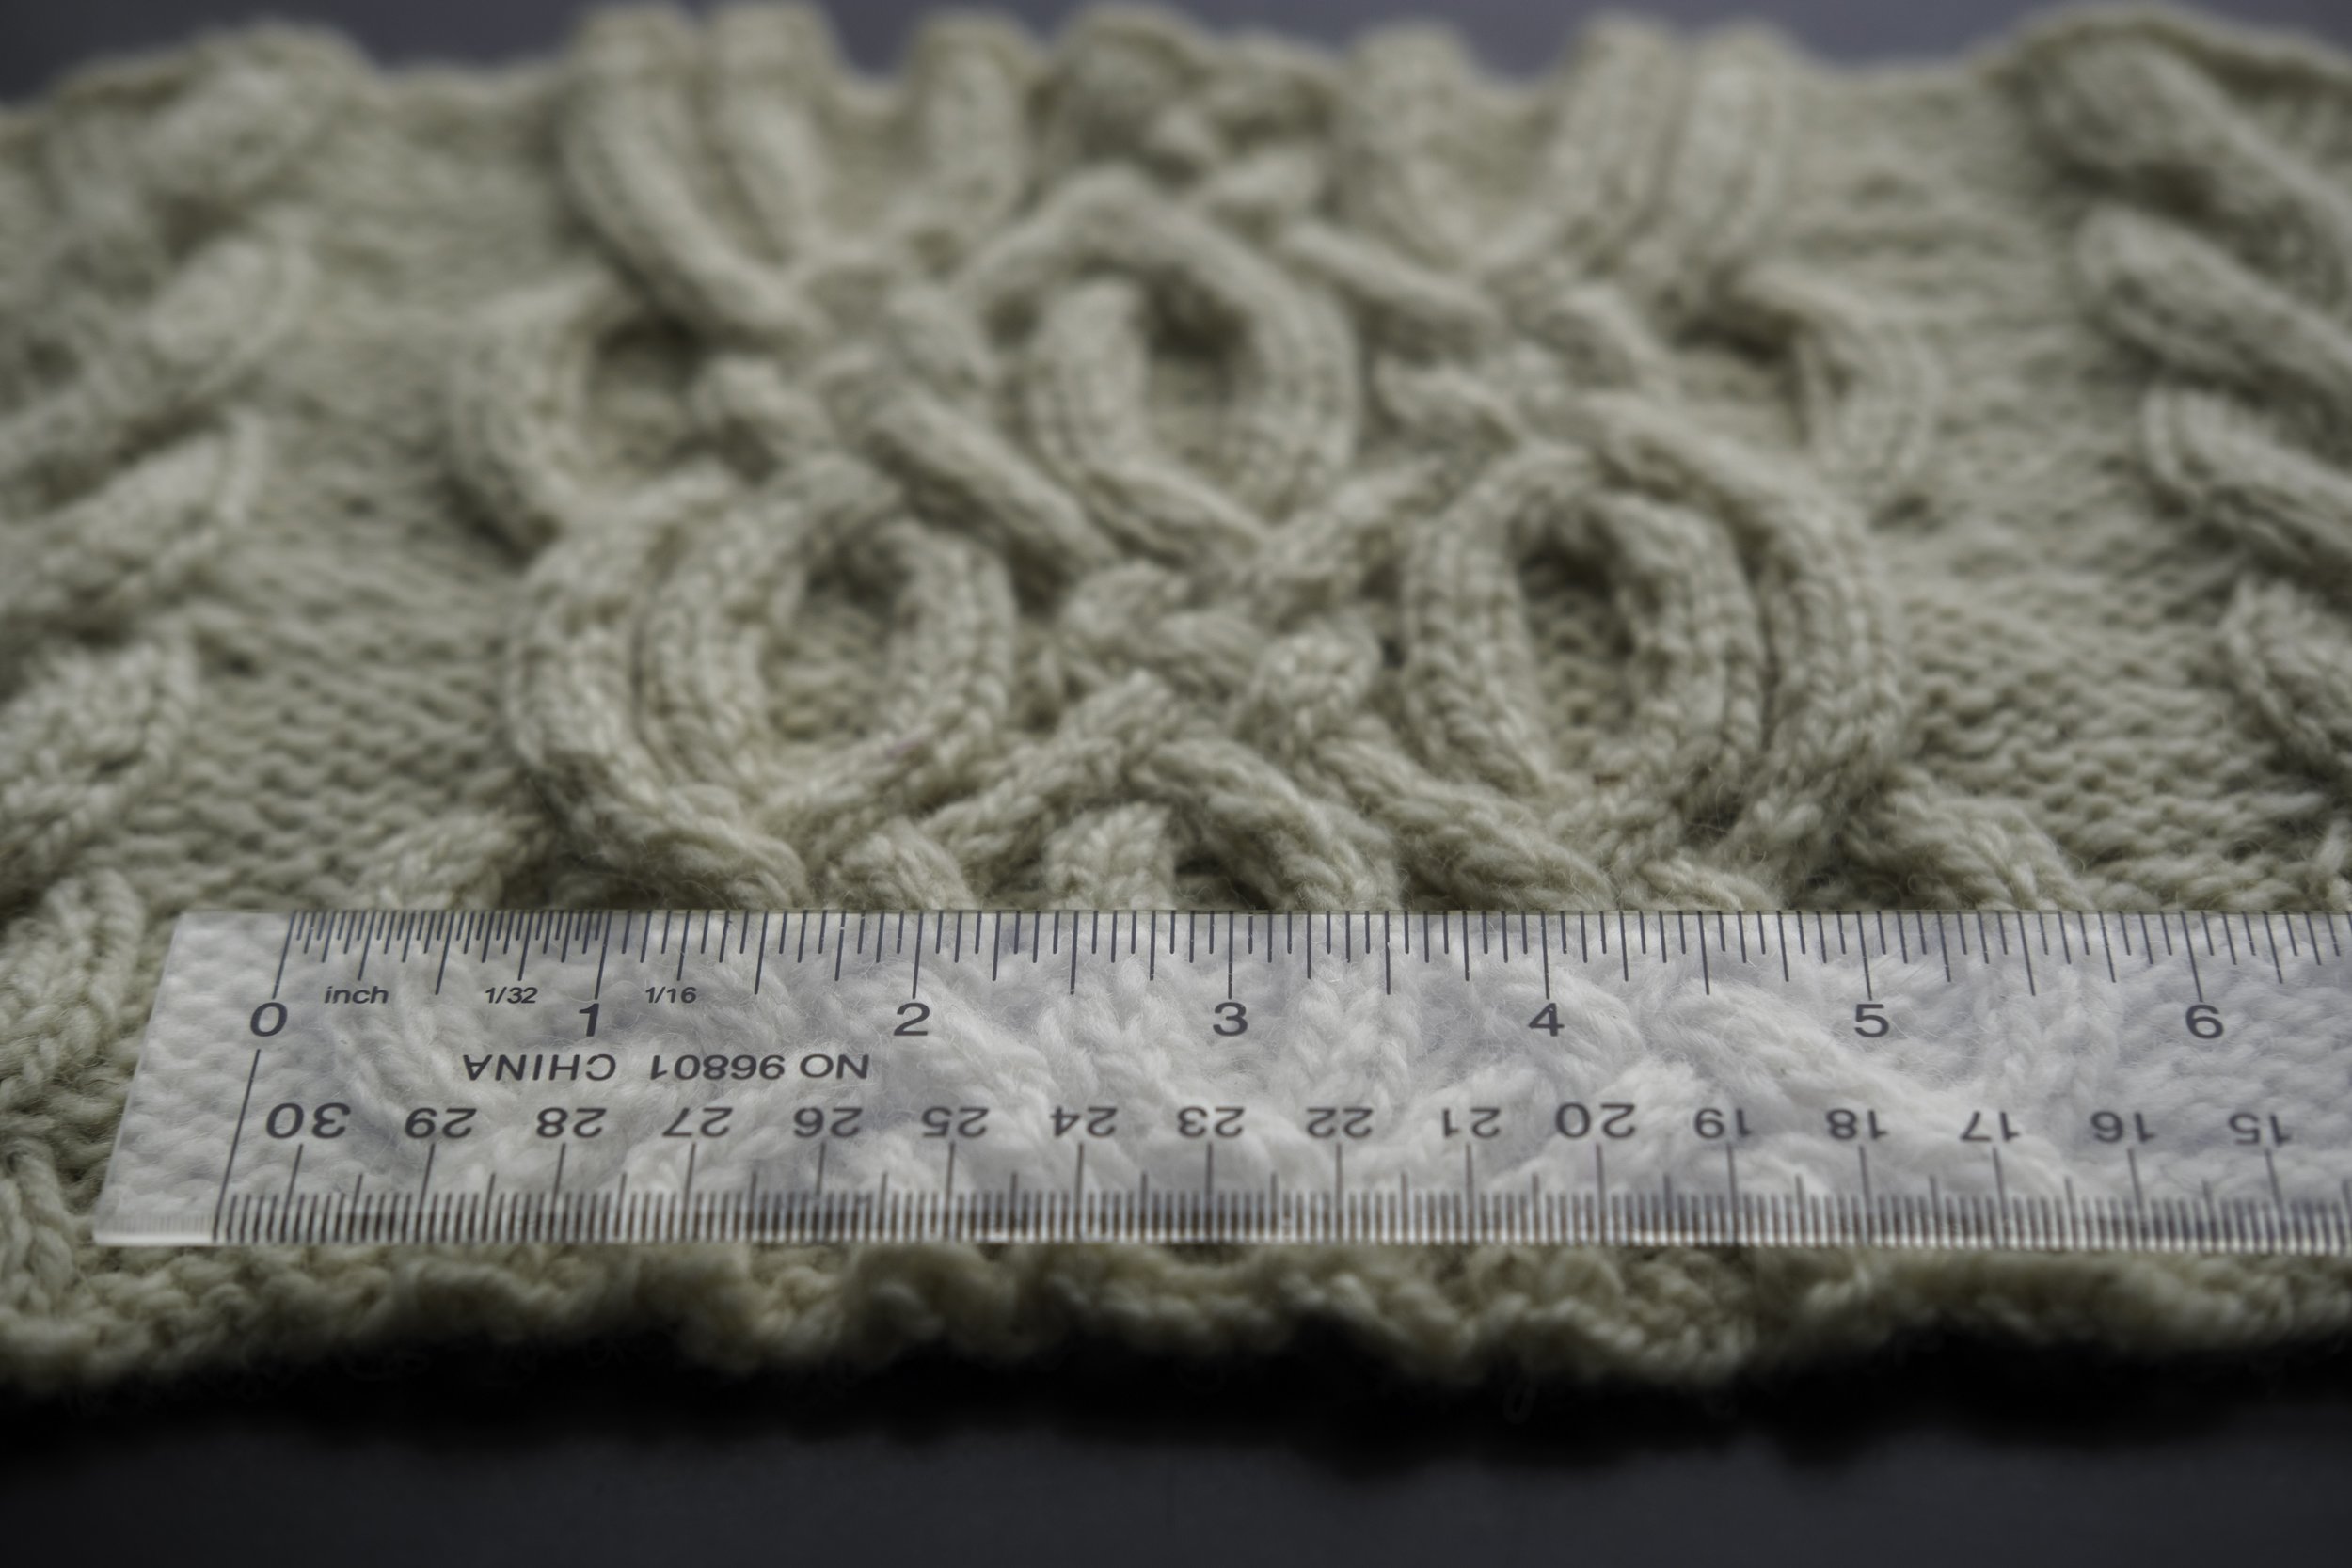 cabling without a cable needle — Knitting Tutorials — Andrea Rangel